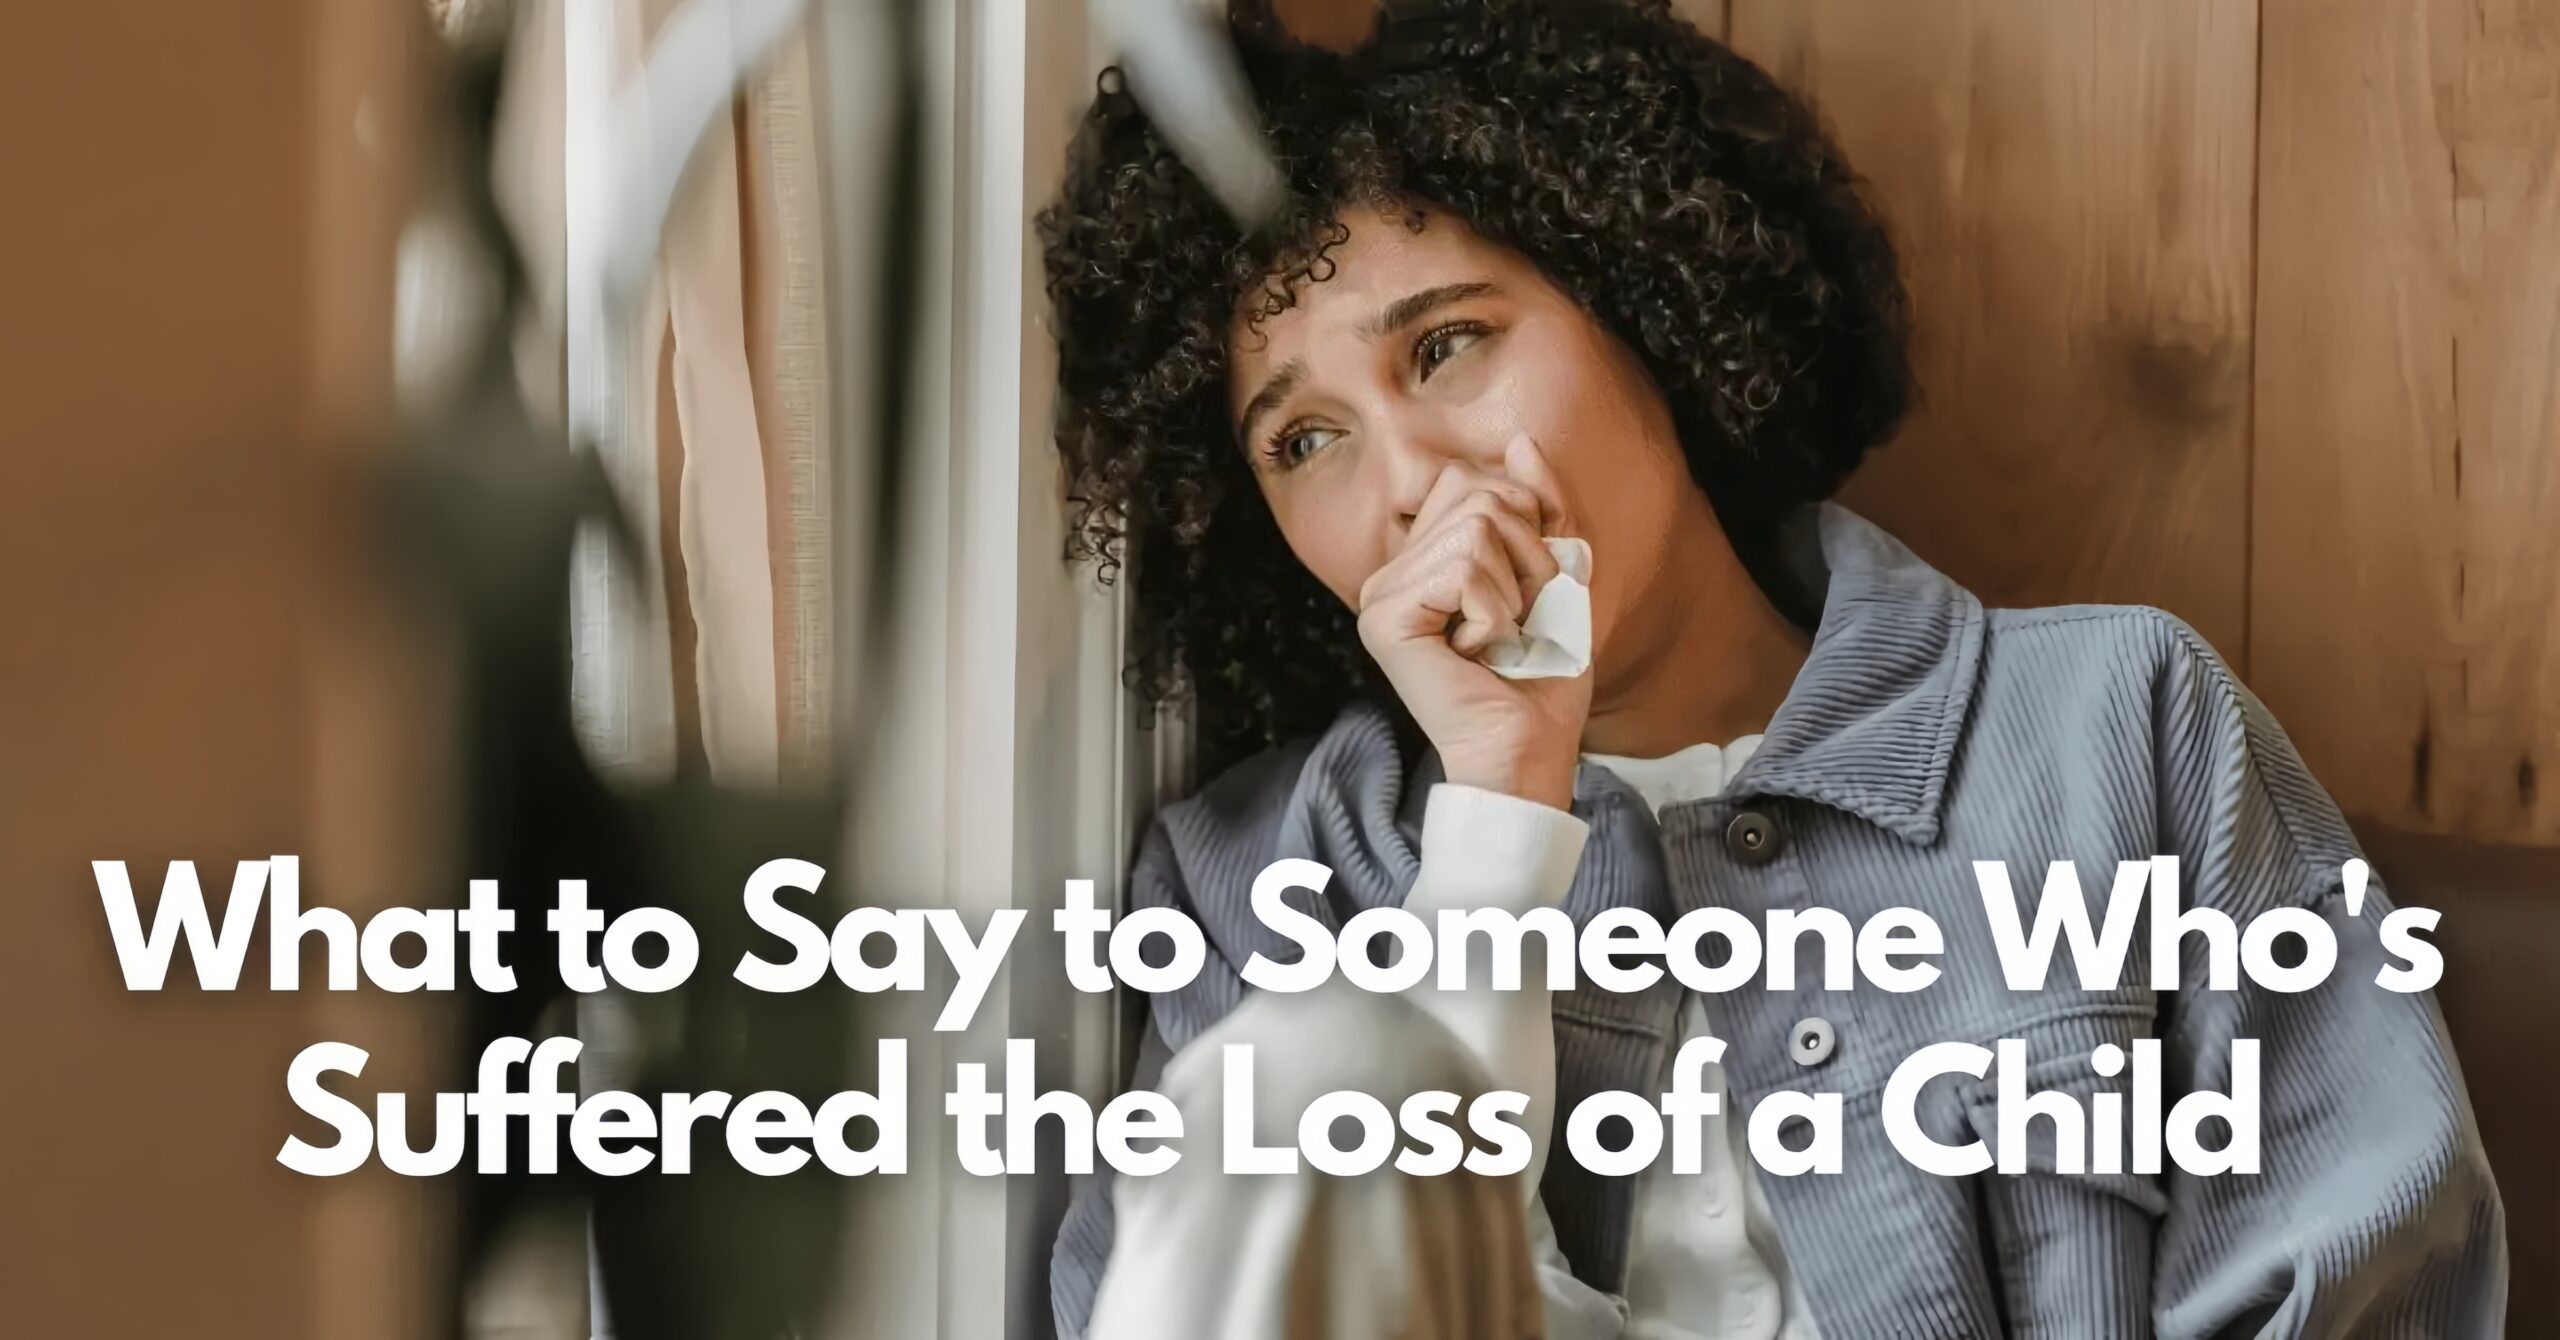 What to say to someone who lost someone